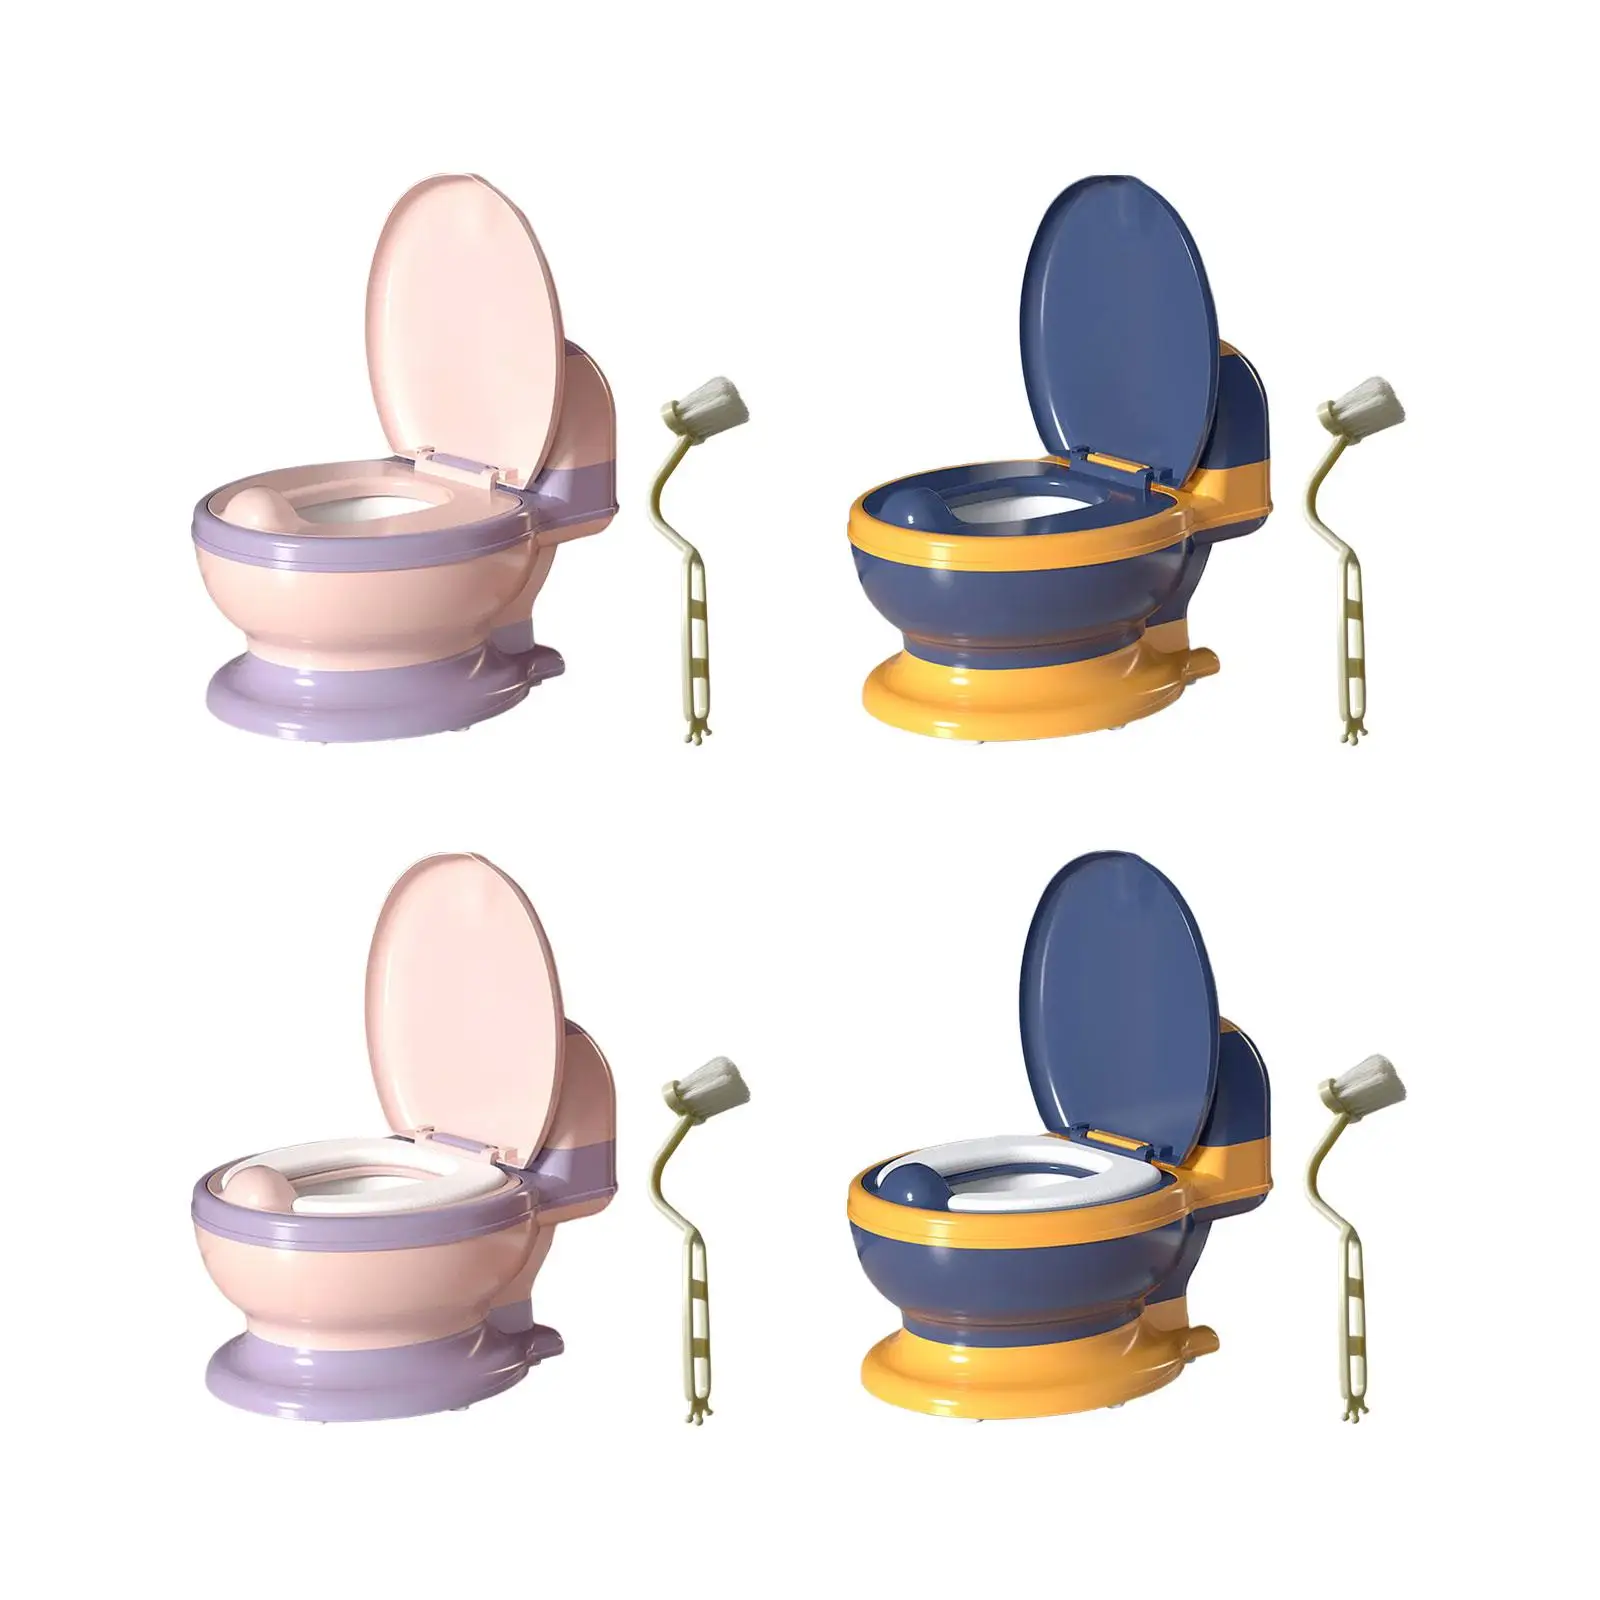 Baby Potty Toilet Non Slip with Wipe Storage Kids Potty Chair Training Transition Potty Seat Babies Kids Ages 0-7 Girls Boys